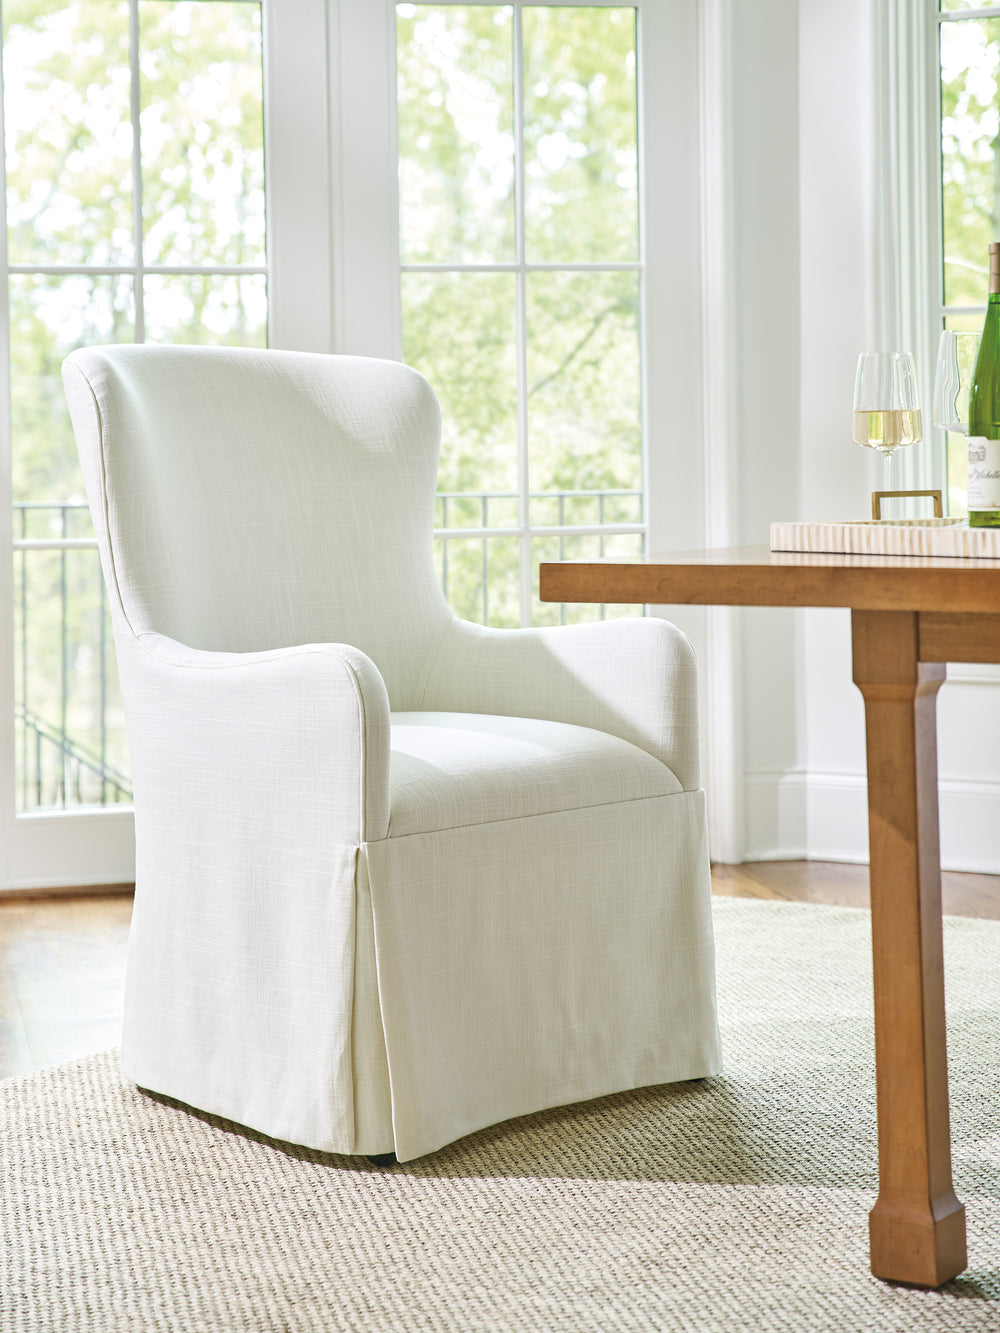 American Home Furniture | Barclay Butera  - Laguna Aliso Upholstered Host Chair W/Casters